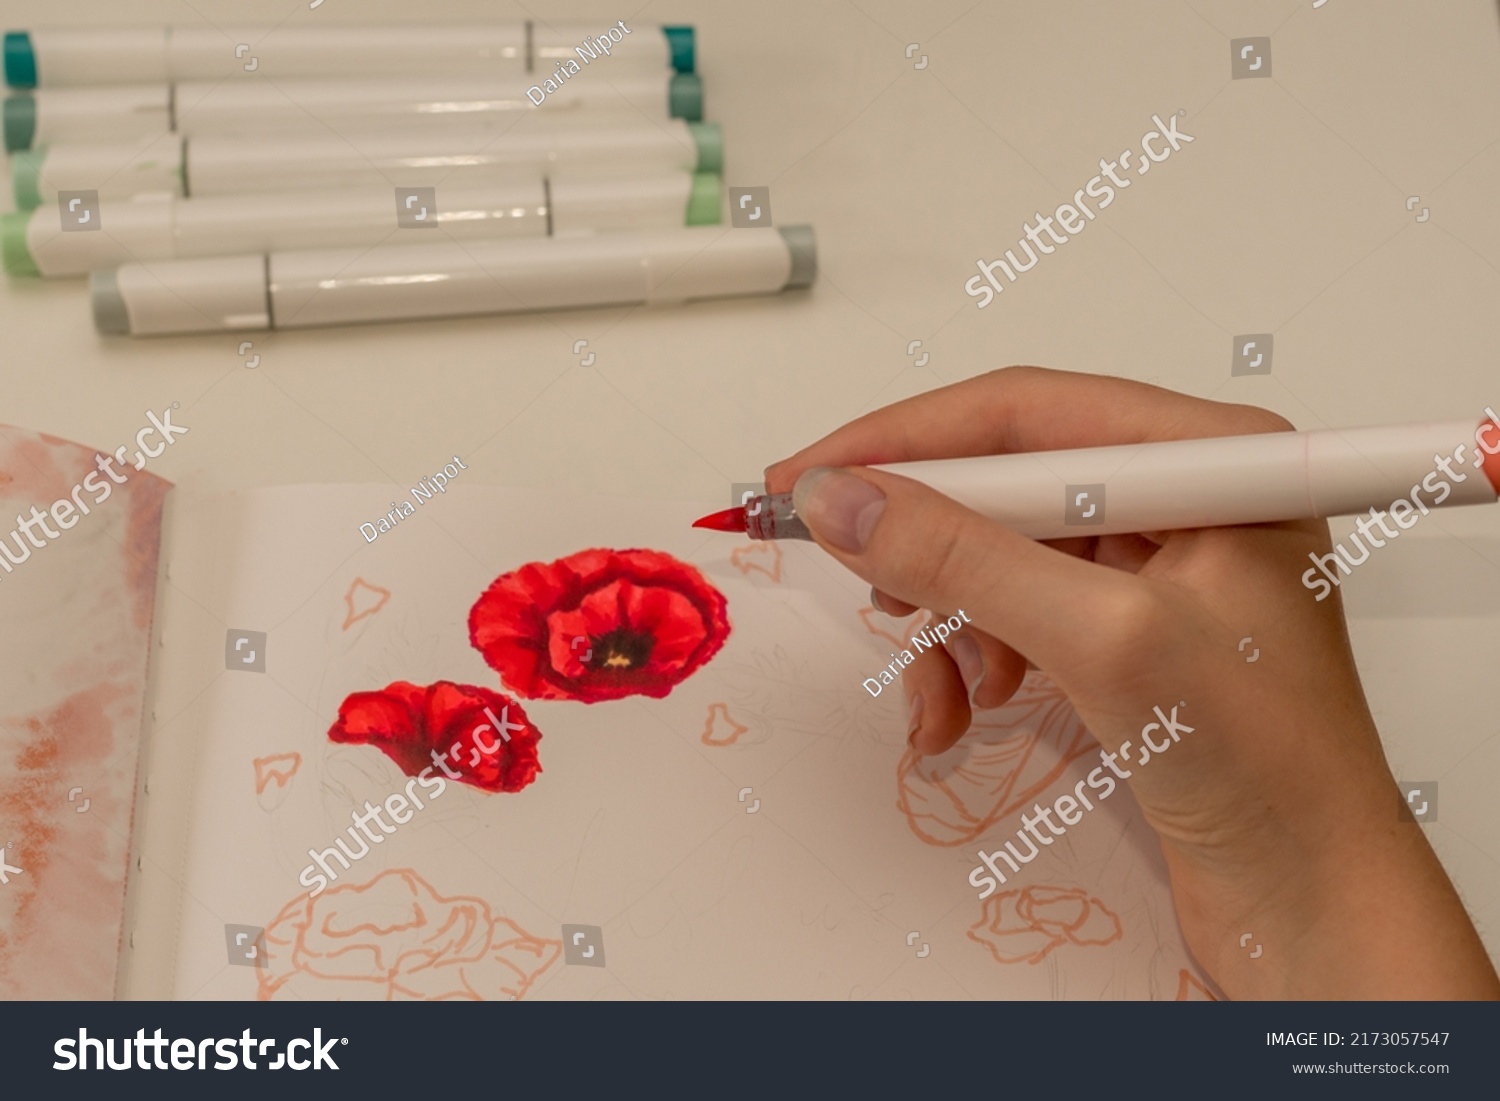 Hand drawing a red poppy wreath sketch in a sketchbook with alcohol based sketch drawing markers. Remembrance Day and Anzac day. #2173057547